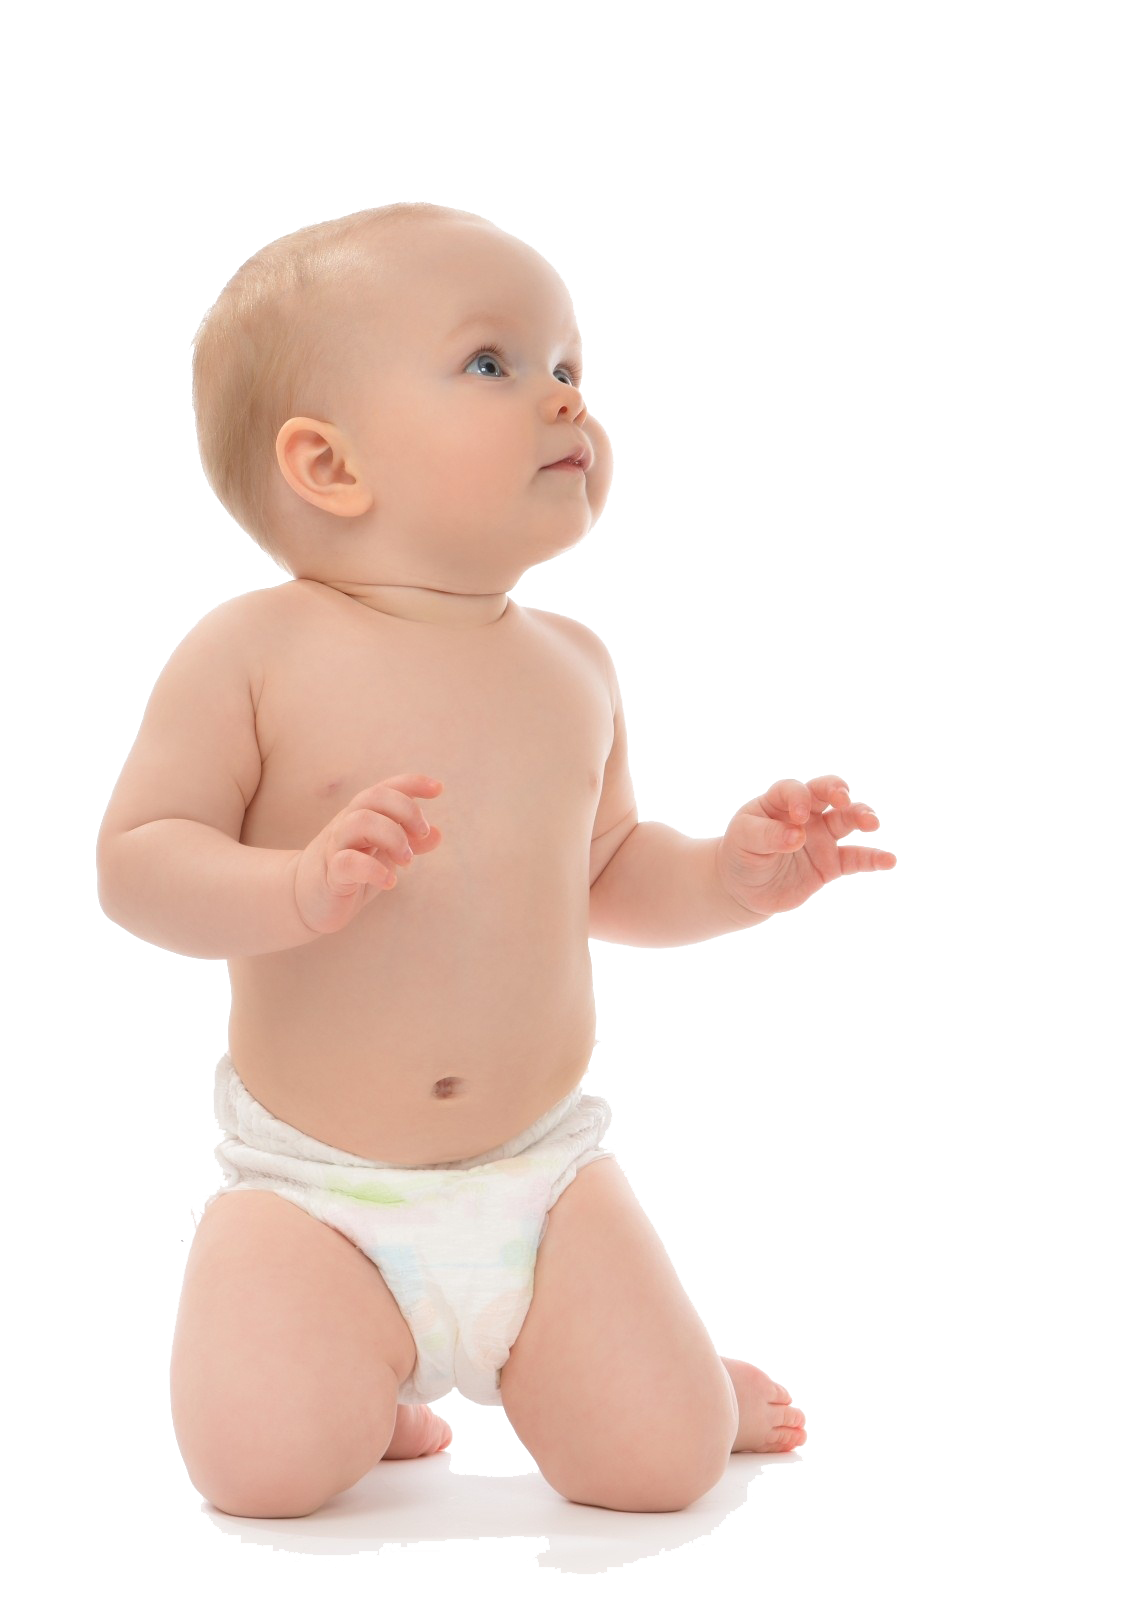 Little Baby Boy PNG Free Download